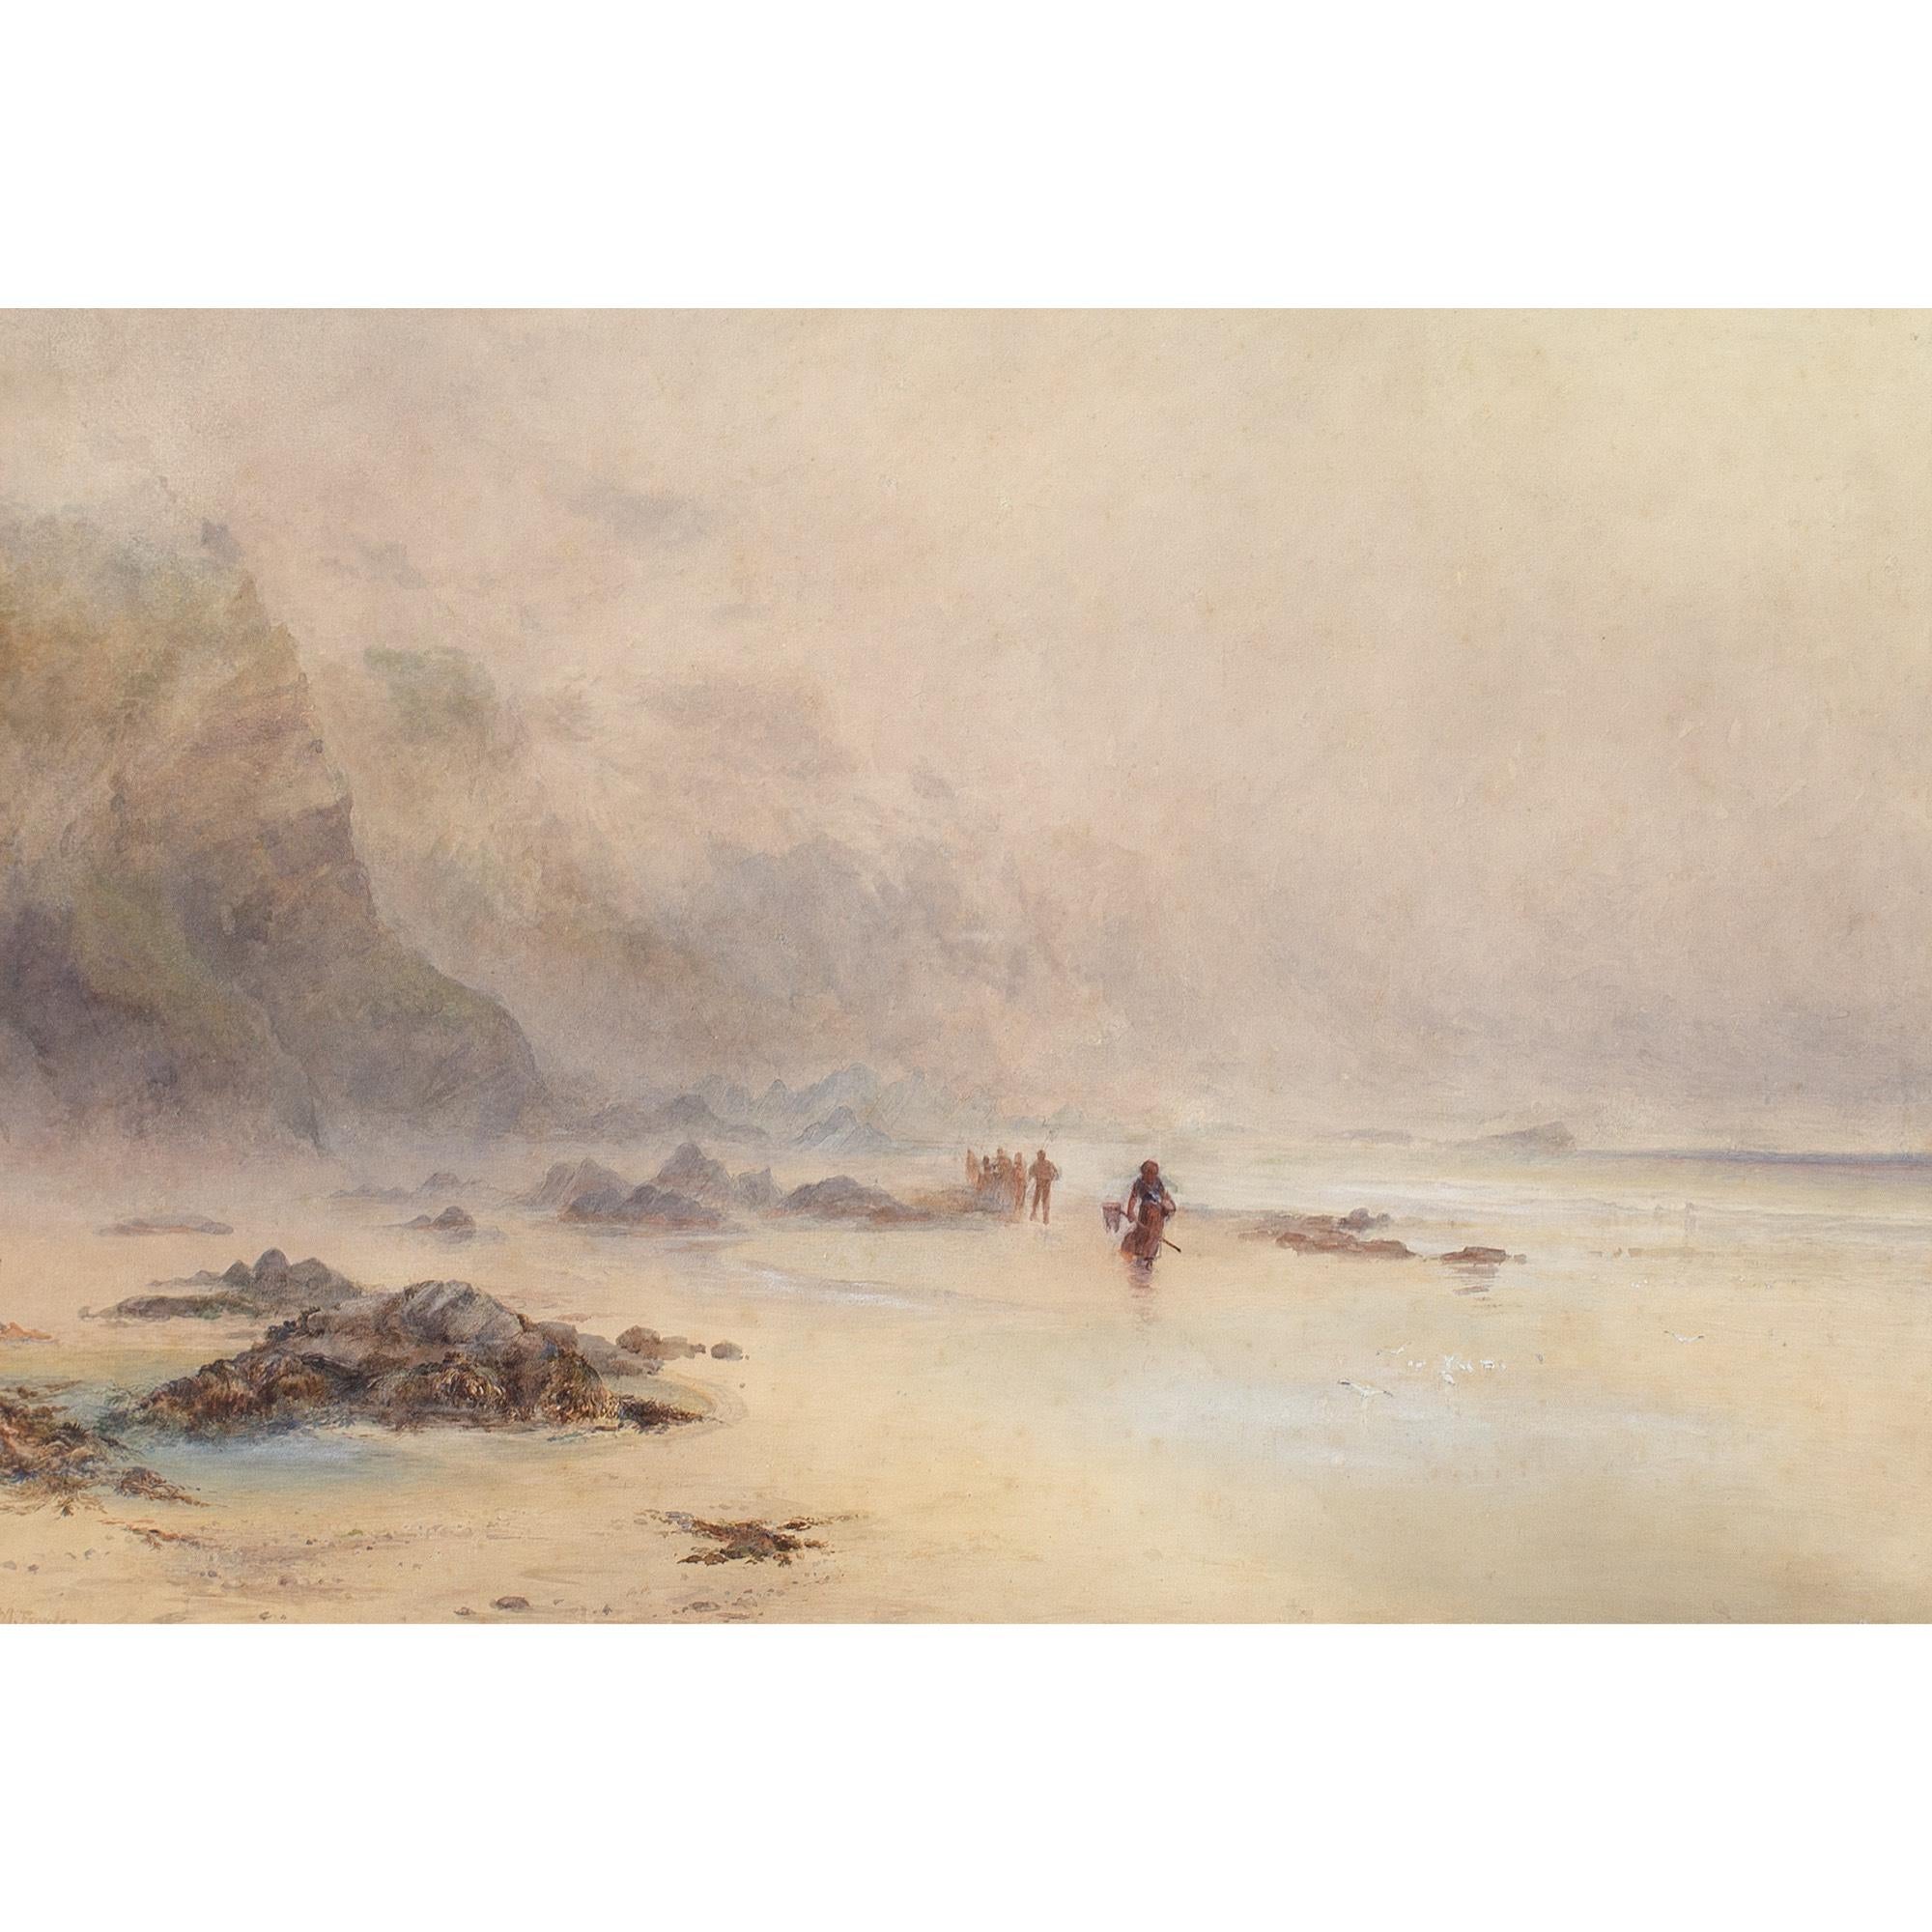 This late 19th-century watercolour by British artist Martha Fowler (b.1843) depicts a view on the Cornish coast.

Fisherfolk carry nets amid a haze of dense fog. Meandering between pools of water left by the retreating tide. Beyond, the craggy stone